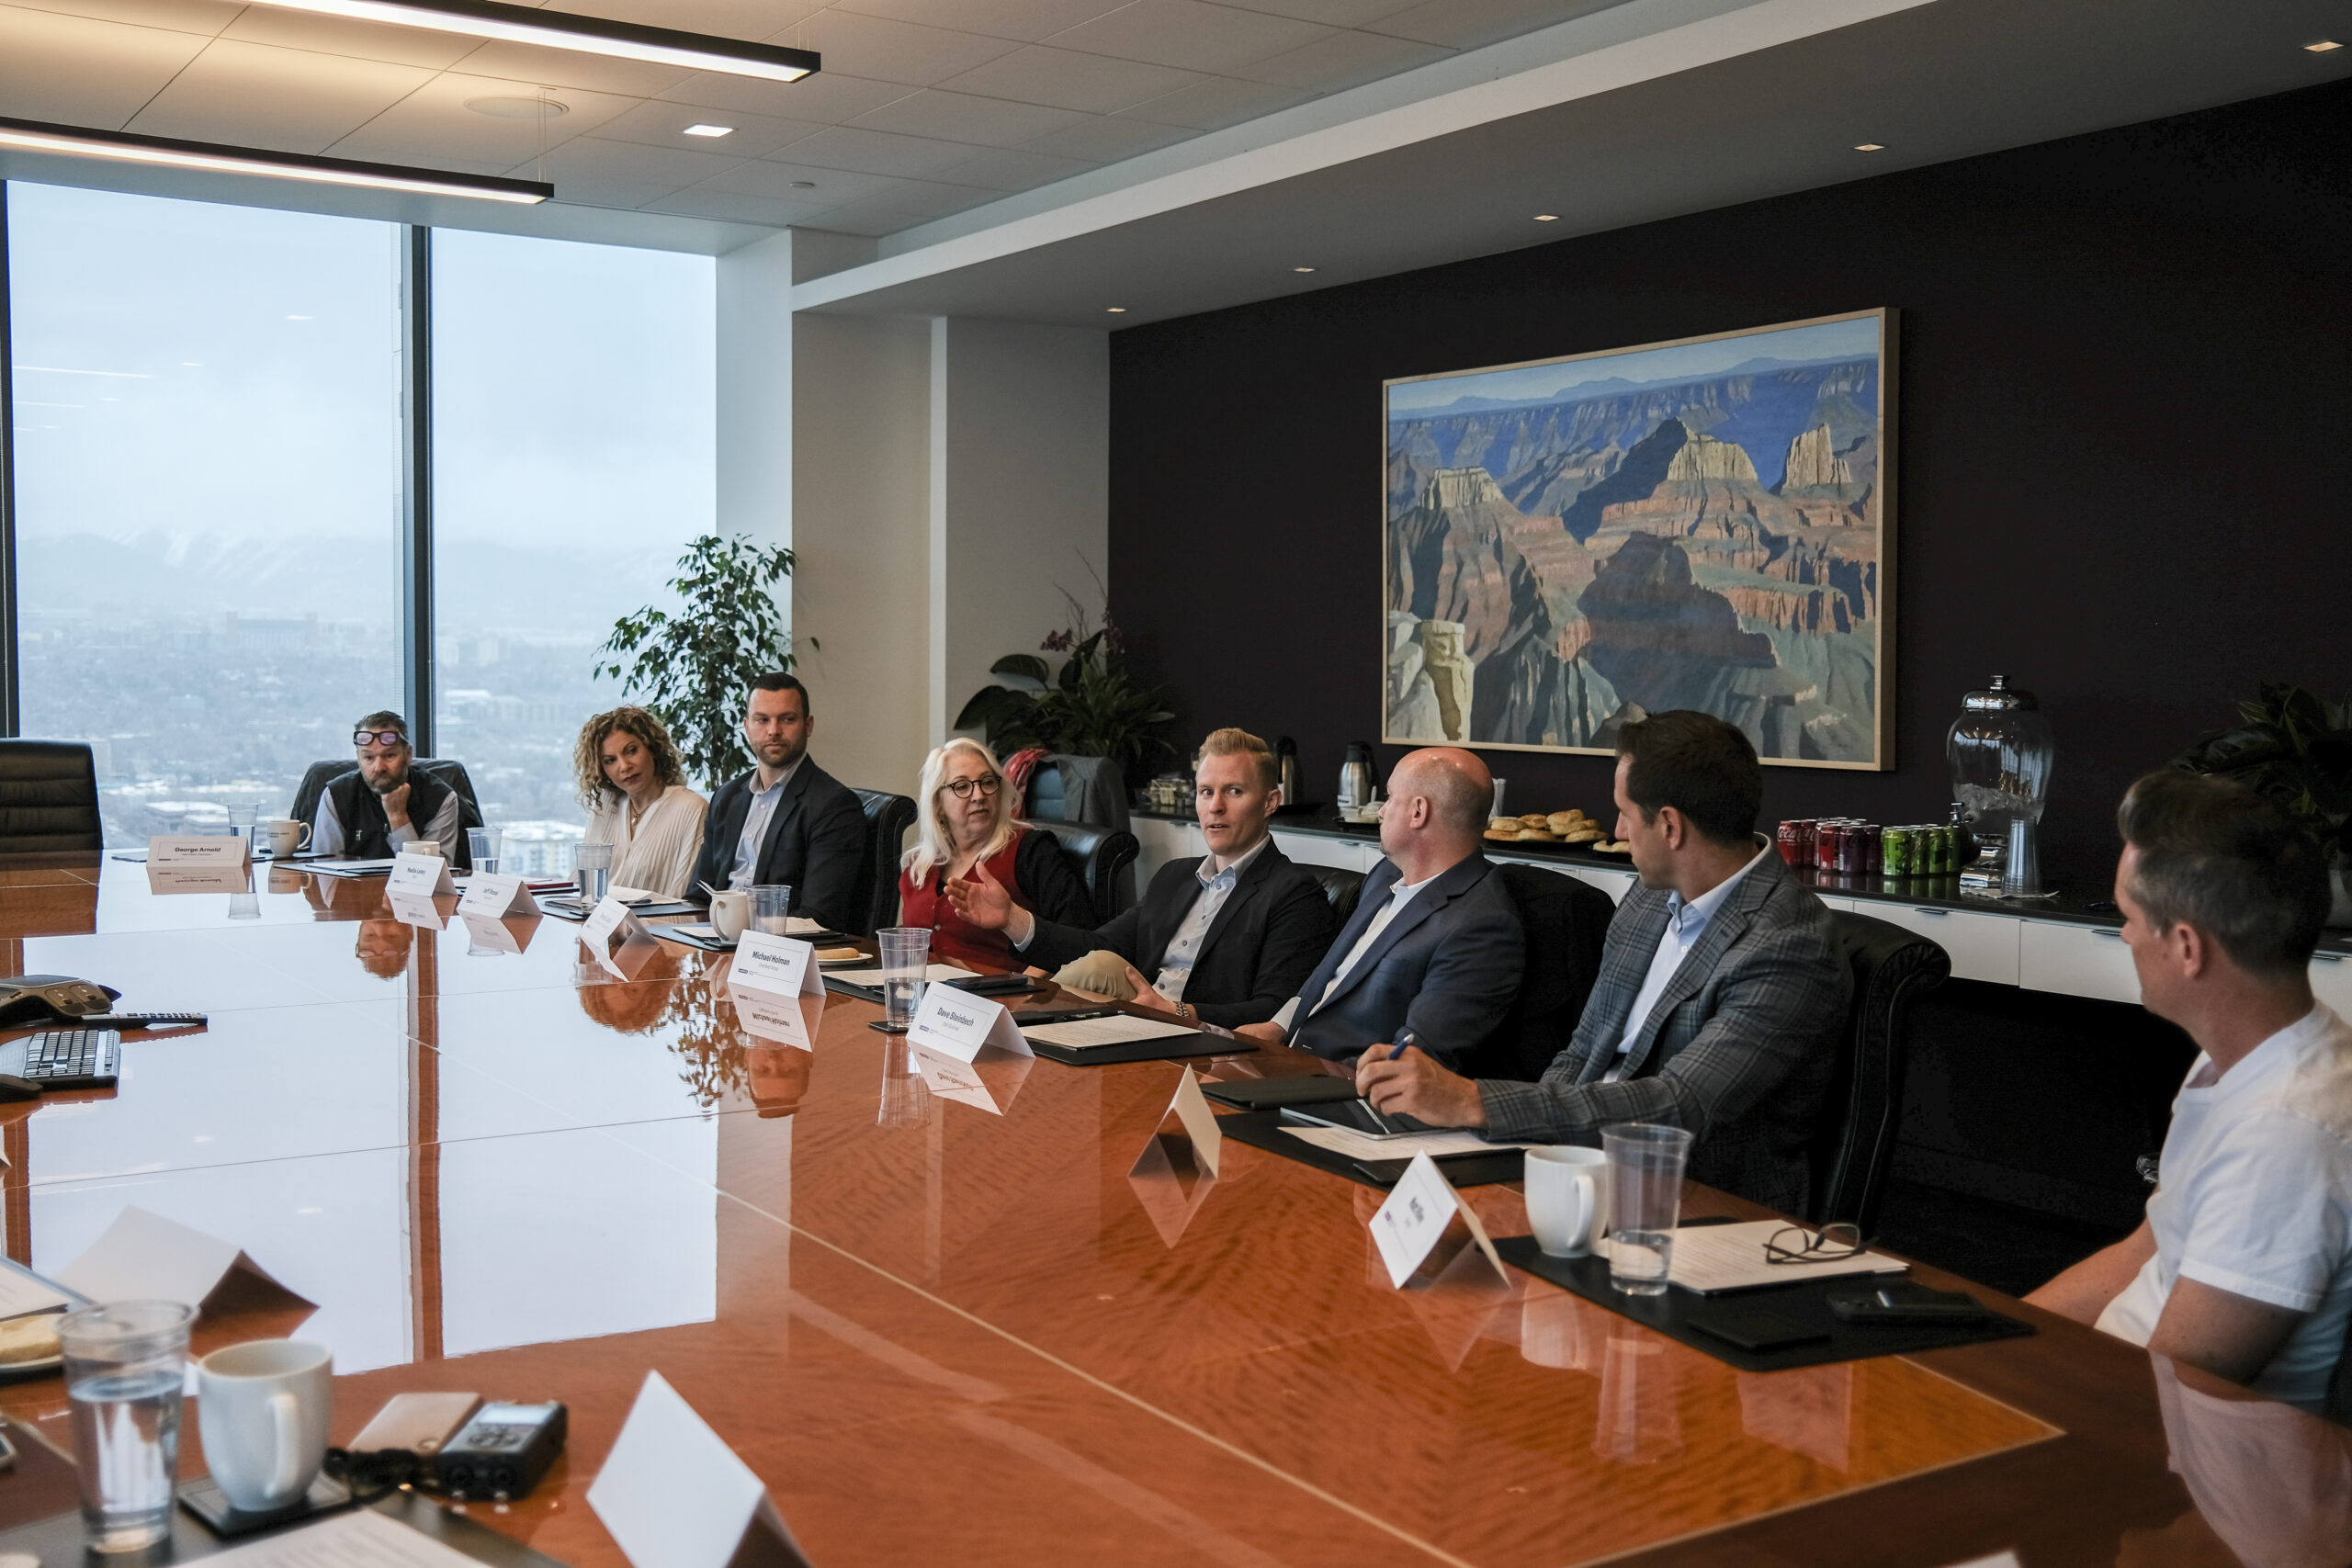 Utah Business held a roundtable conversation with Utah’s commercial real estate leaders to discuss interest rates, hybrid work, multi-family dwellings and more.